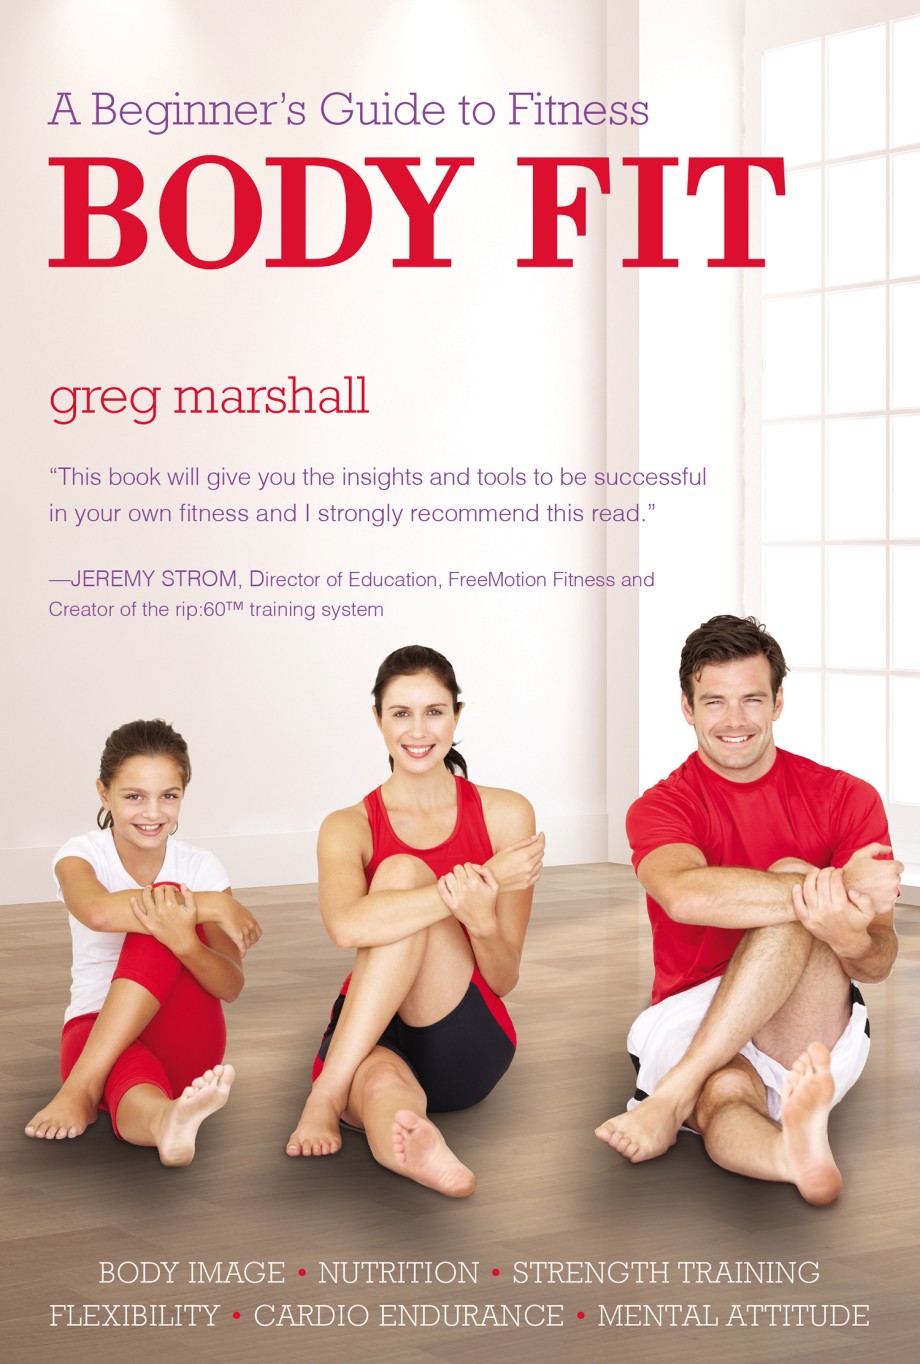 Body Fit A Beginner's Guide to Fitness